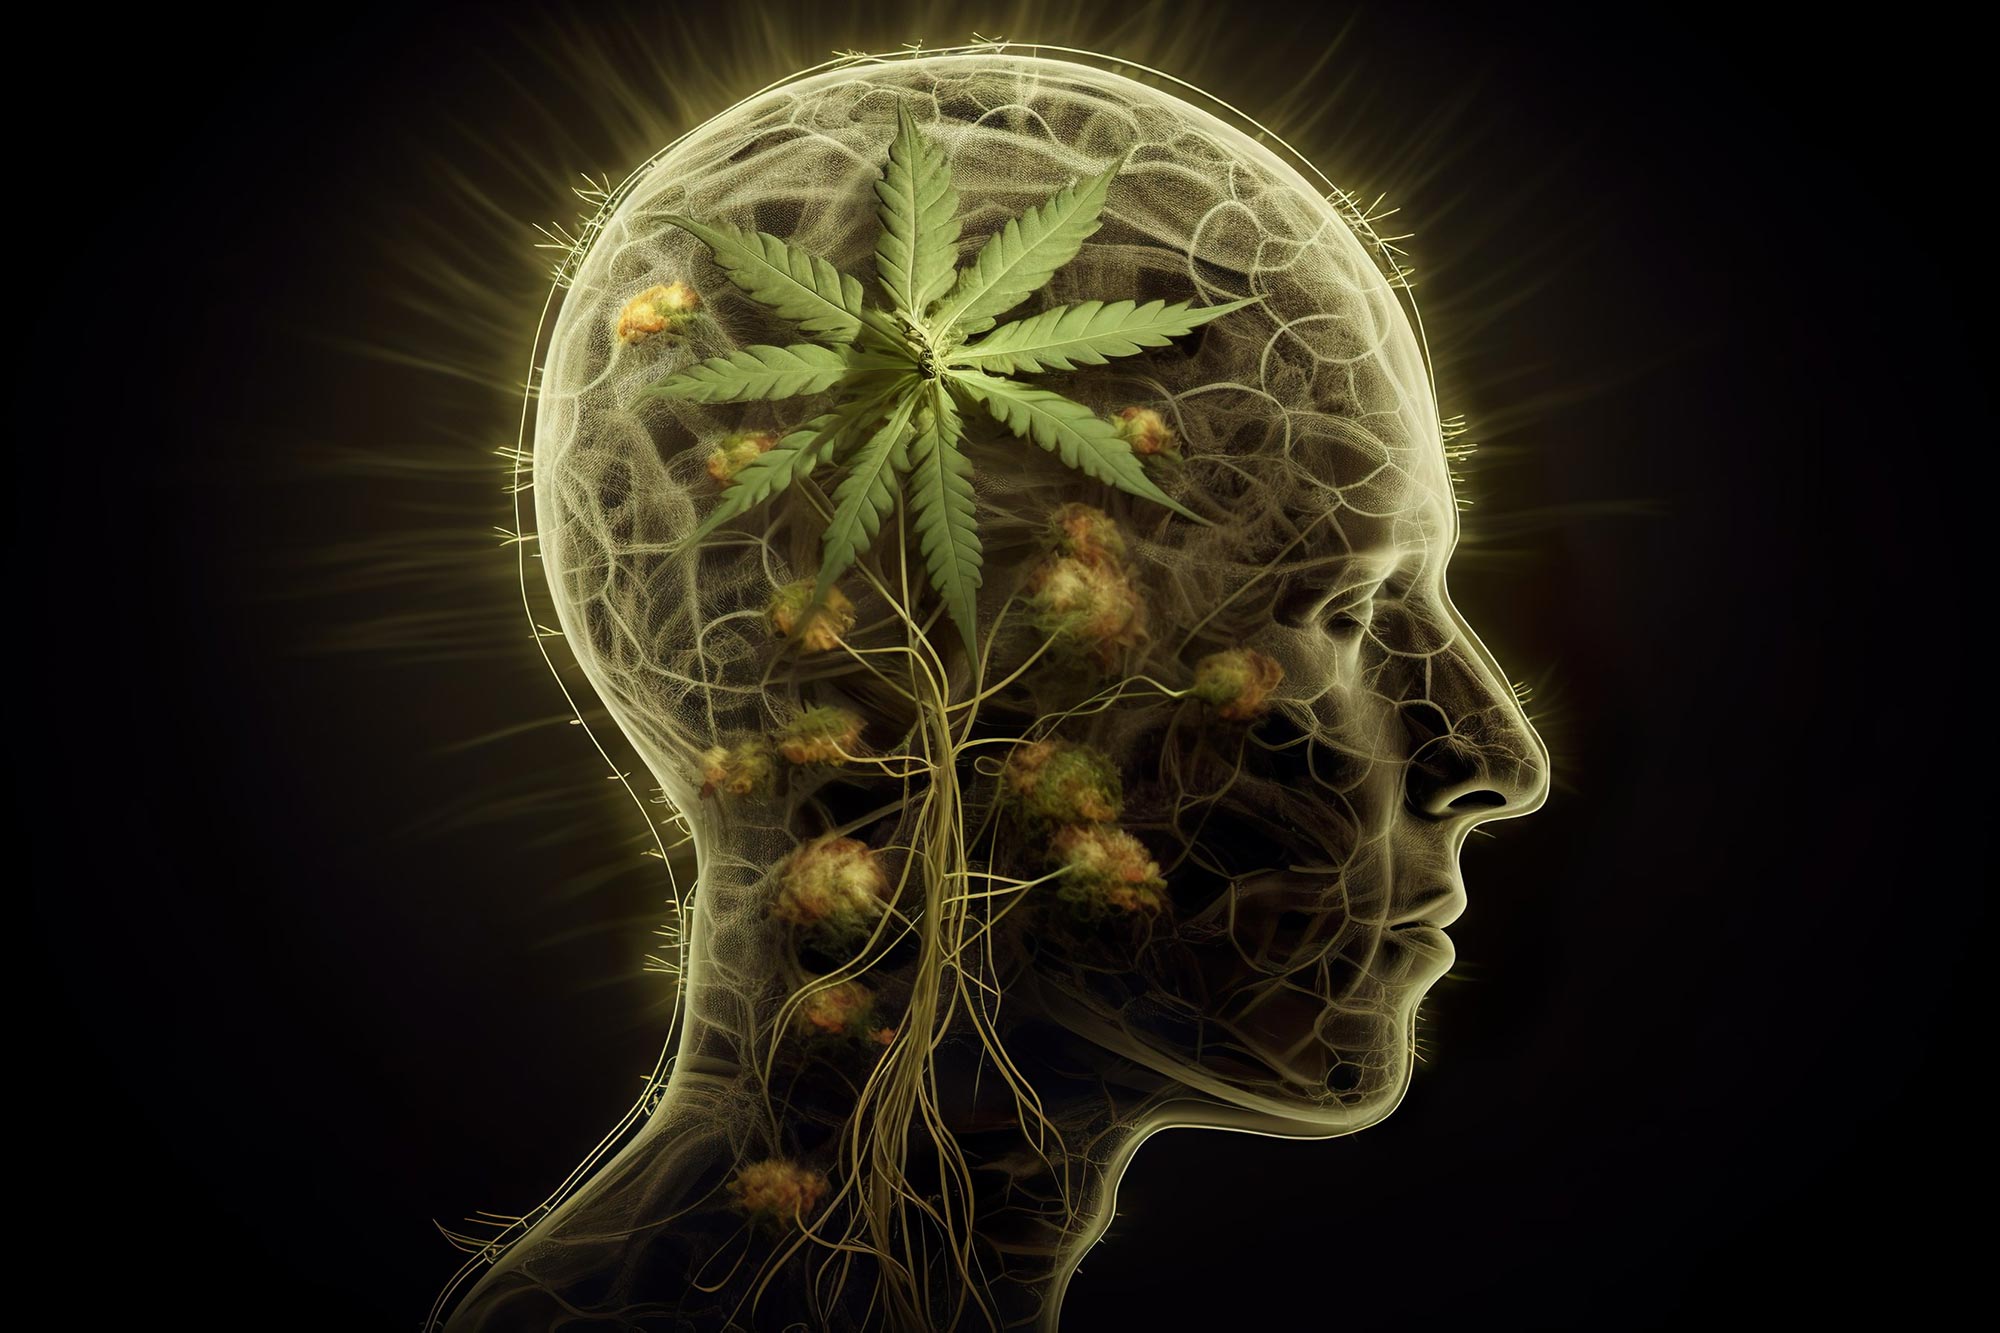 Scientists Uncover Potential Health Risks of Cannabis That Could Impact Medical Usage